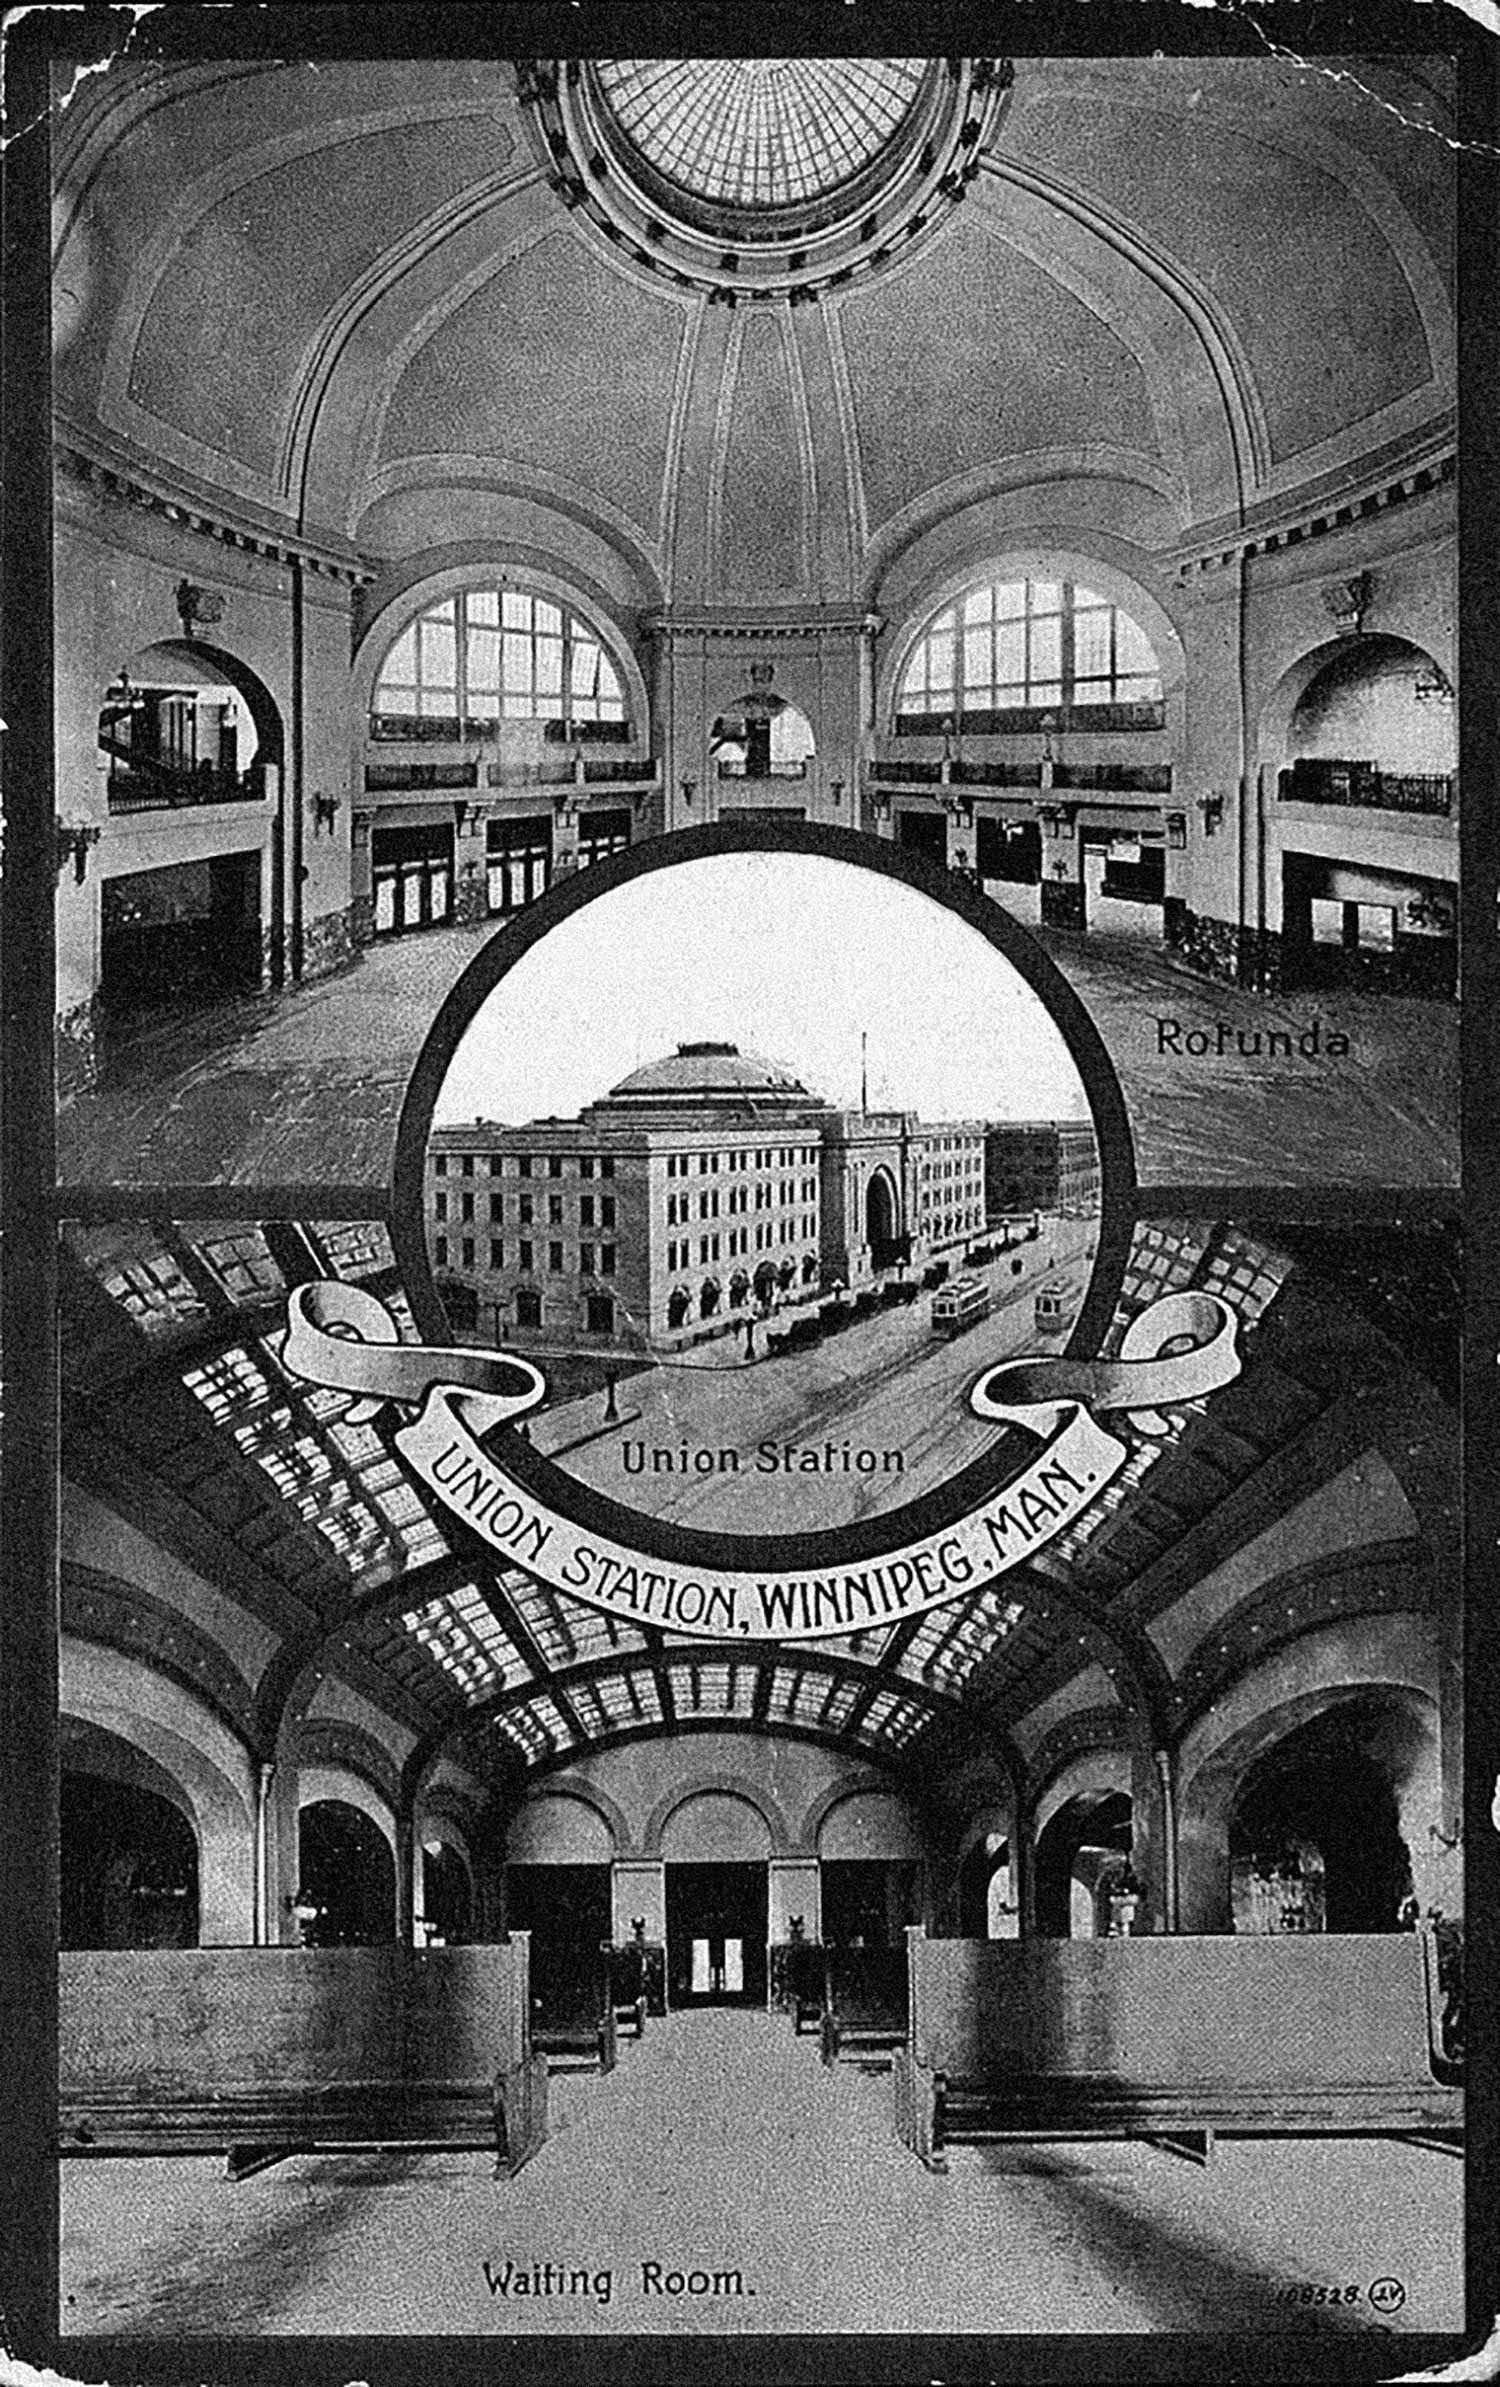 A black and white postcard showing three views of Union Station. Two interior views of the rotunda and waiting room show grand ceilings and arches, and a smaller circle in the center shows the exterior.